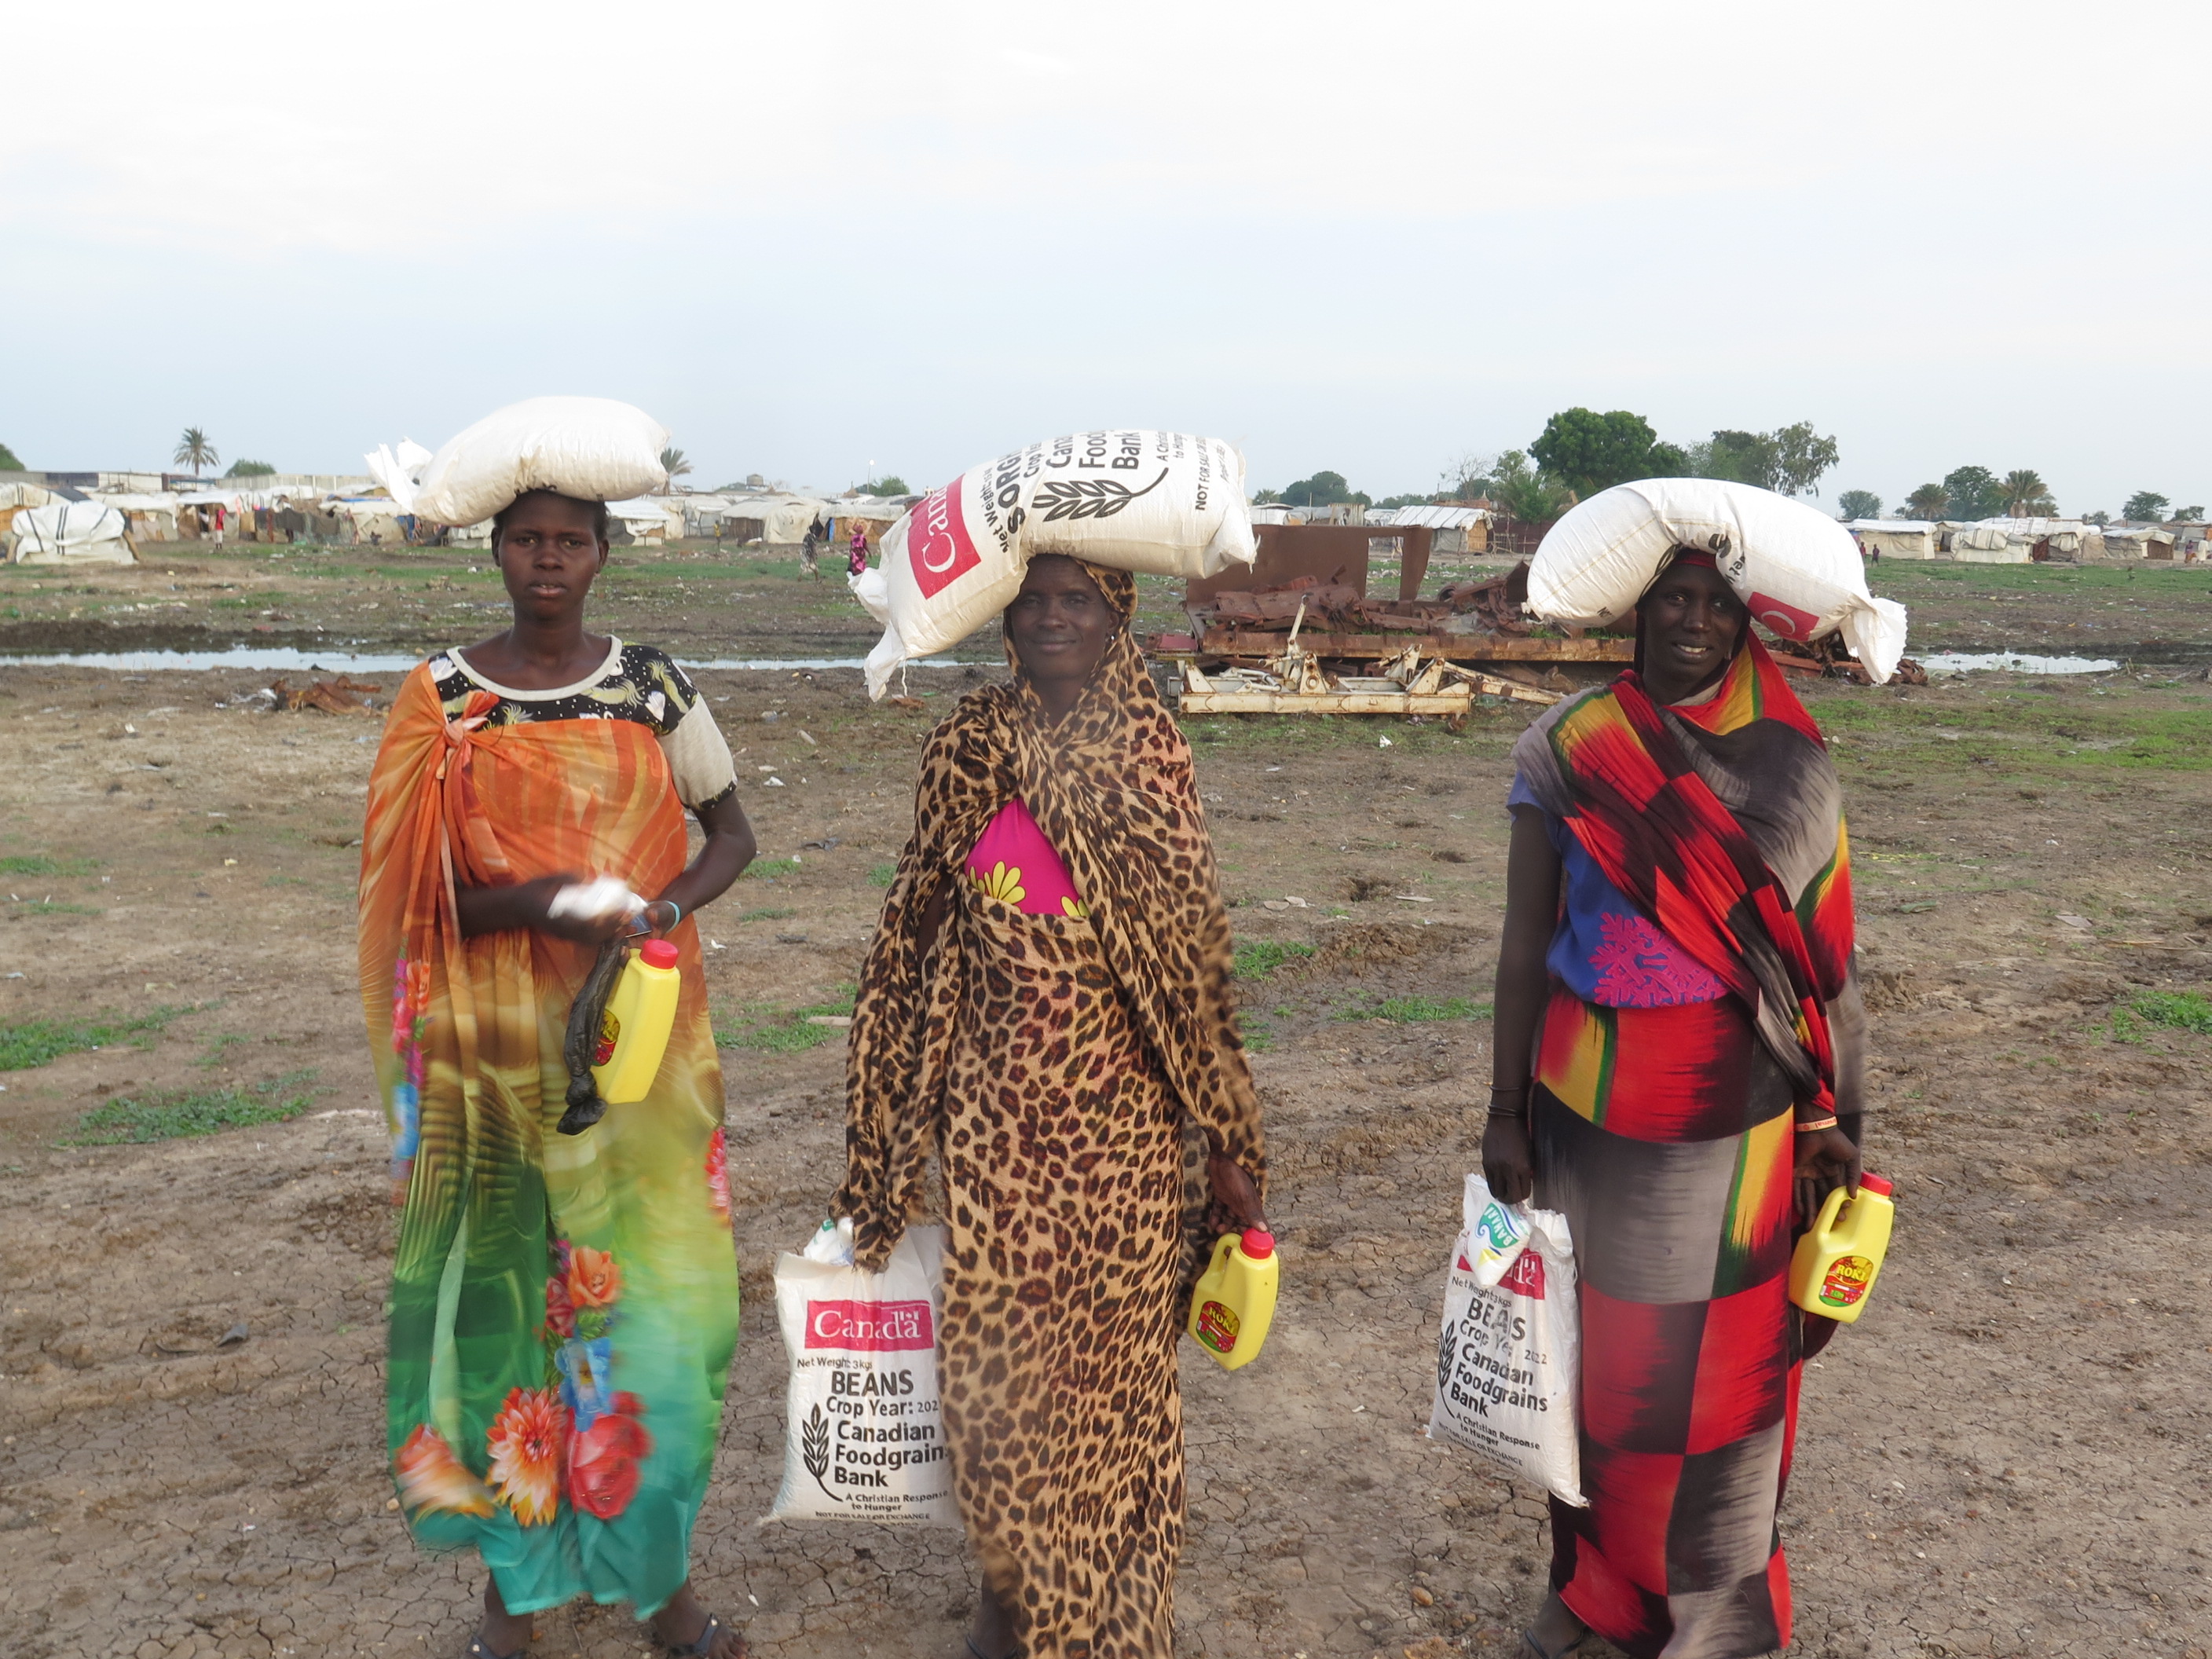 A group of people holding bags of food from Canadian Foodgrains Bank